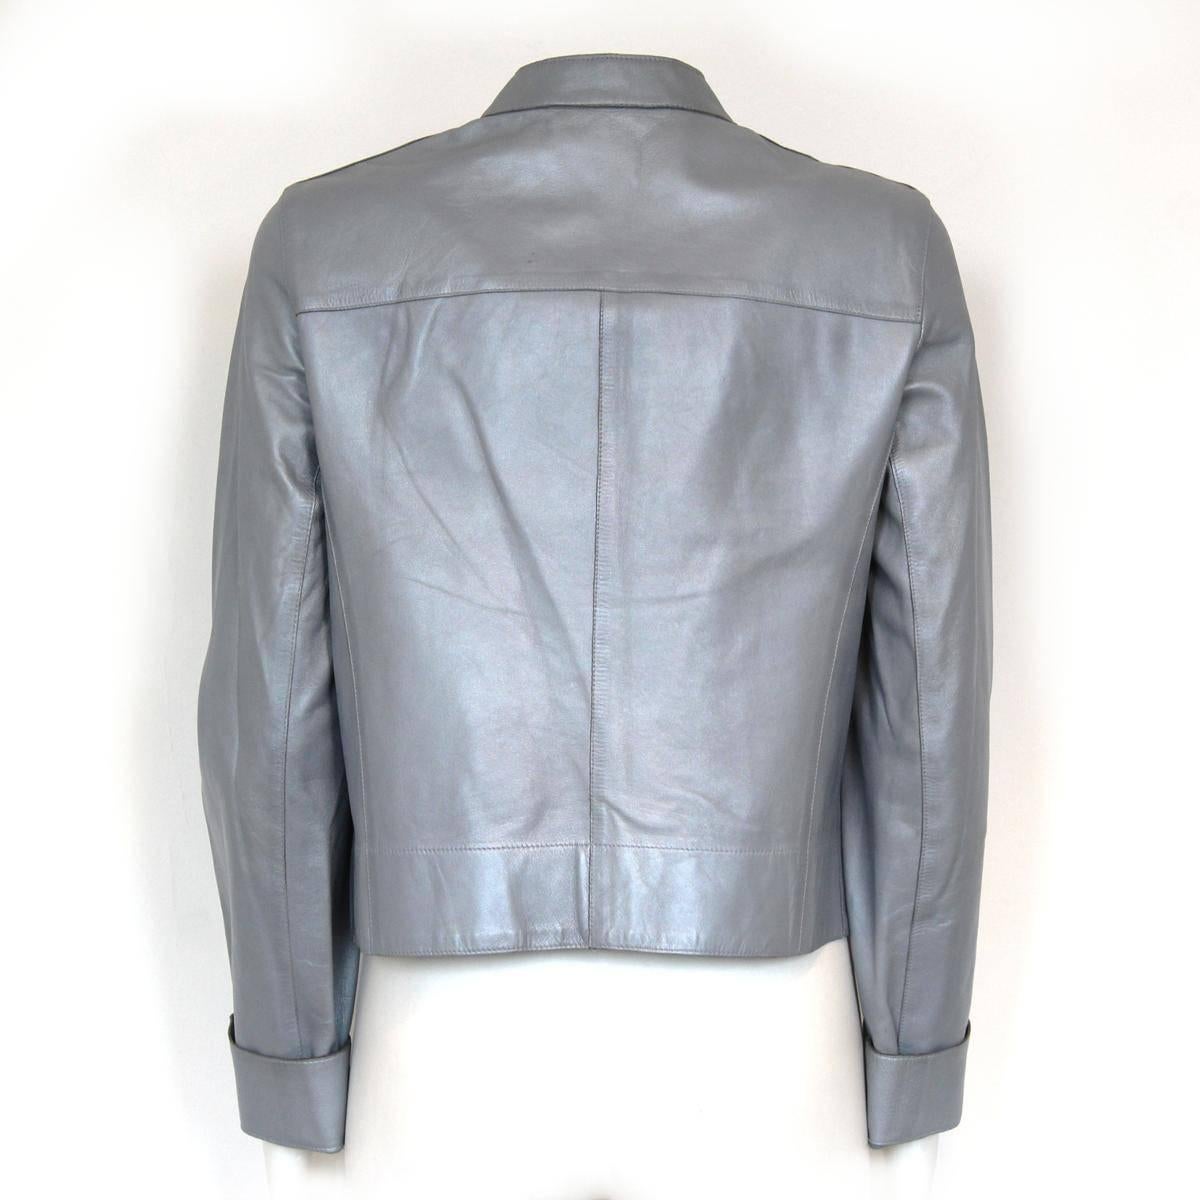 Stunning and classy Prada jacket
Leather
Azure perlage color
Central zip closure
two pockets
Lengt shoulder / hem cm 47 (18.5 inches)
Fast international shipping included in the price